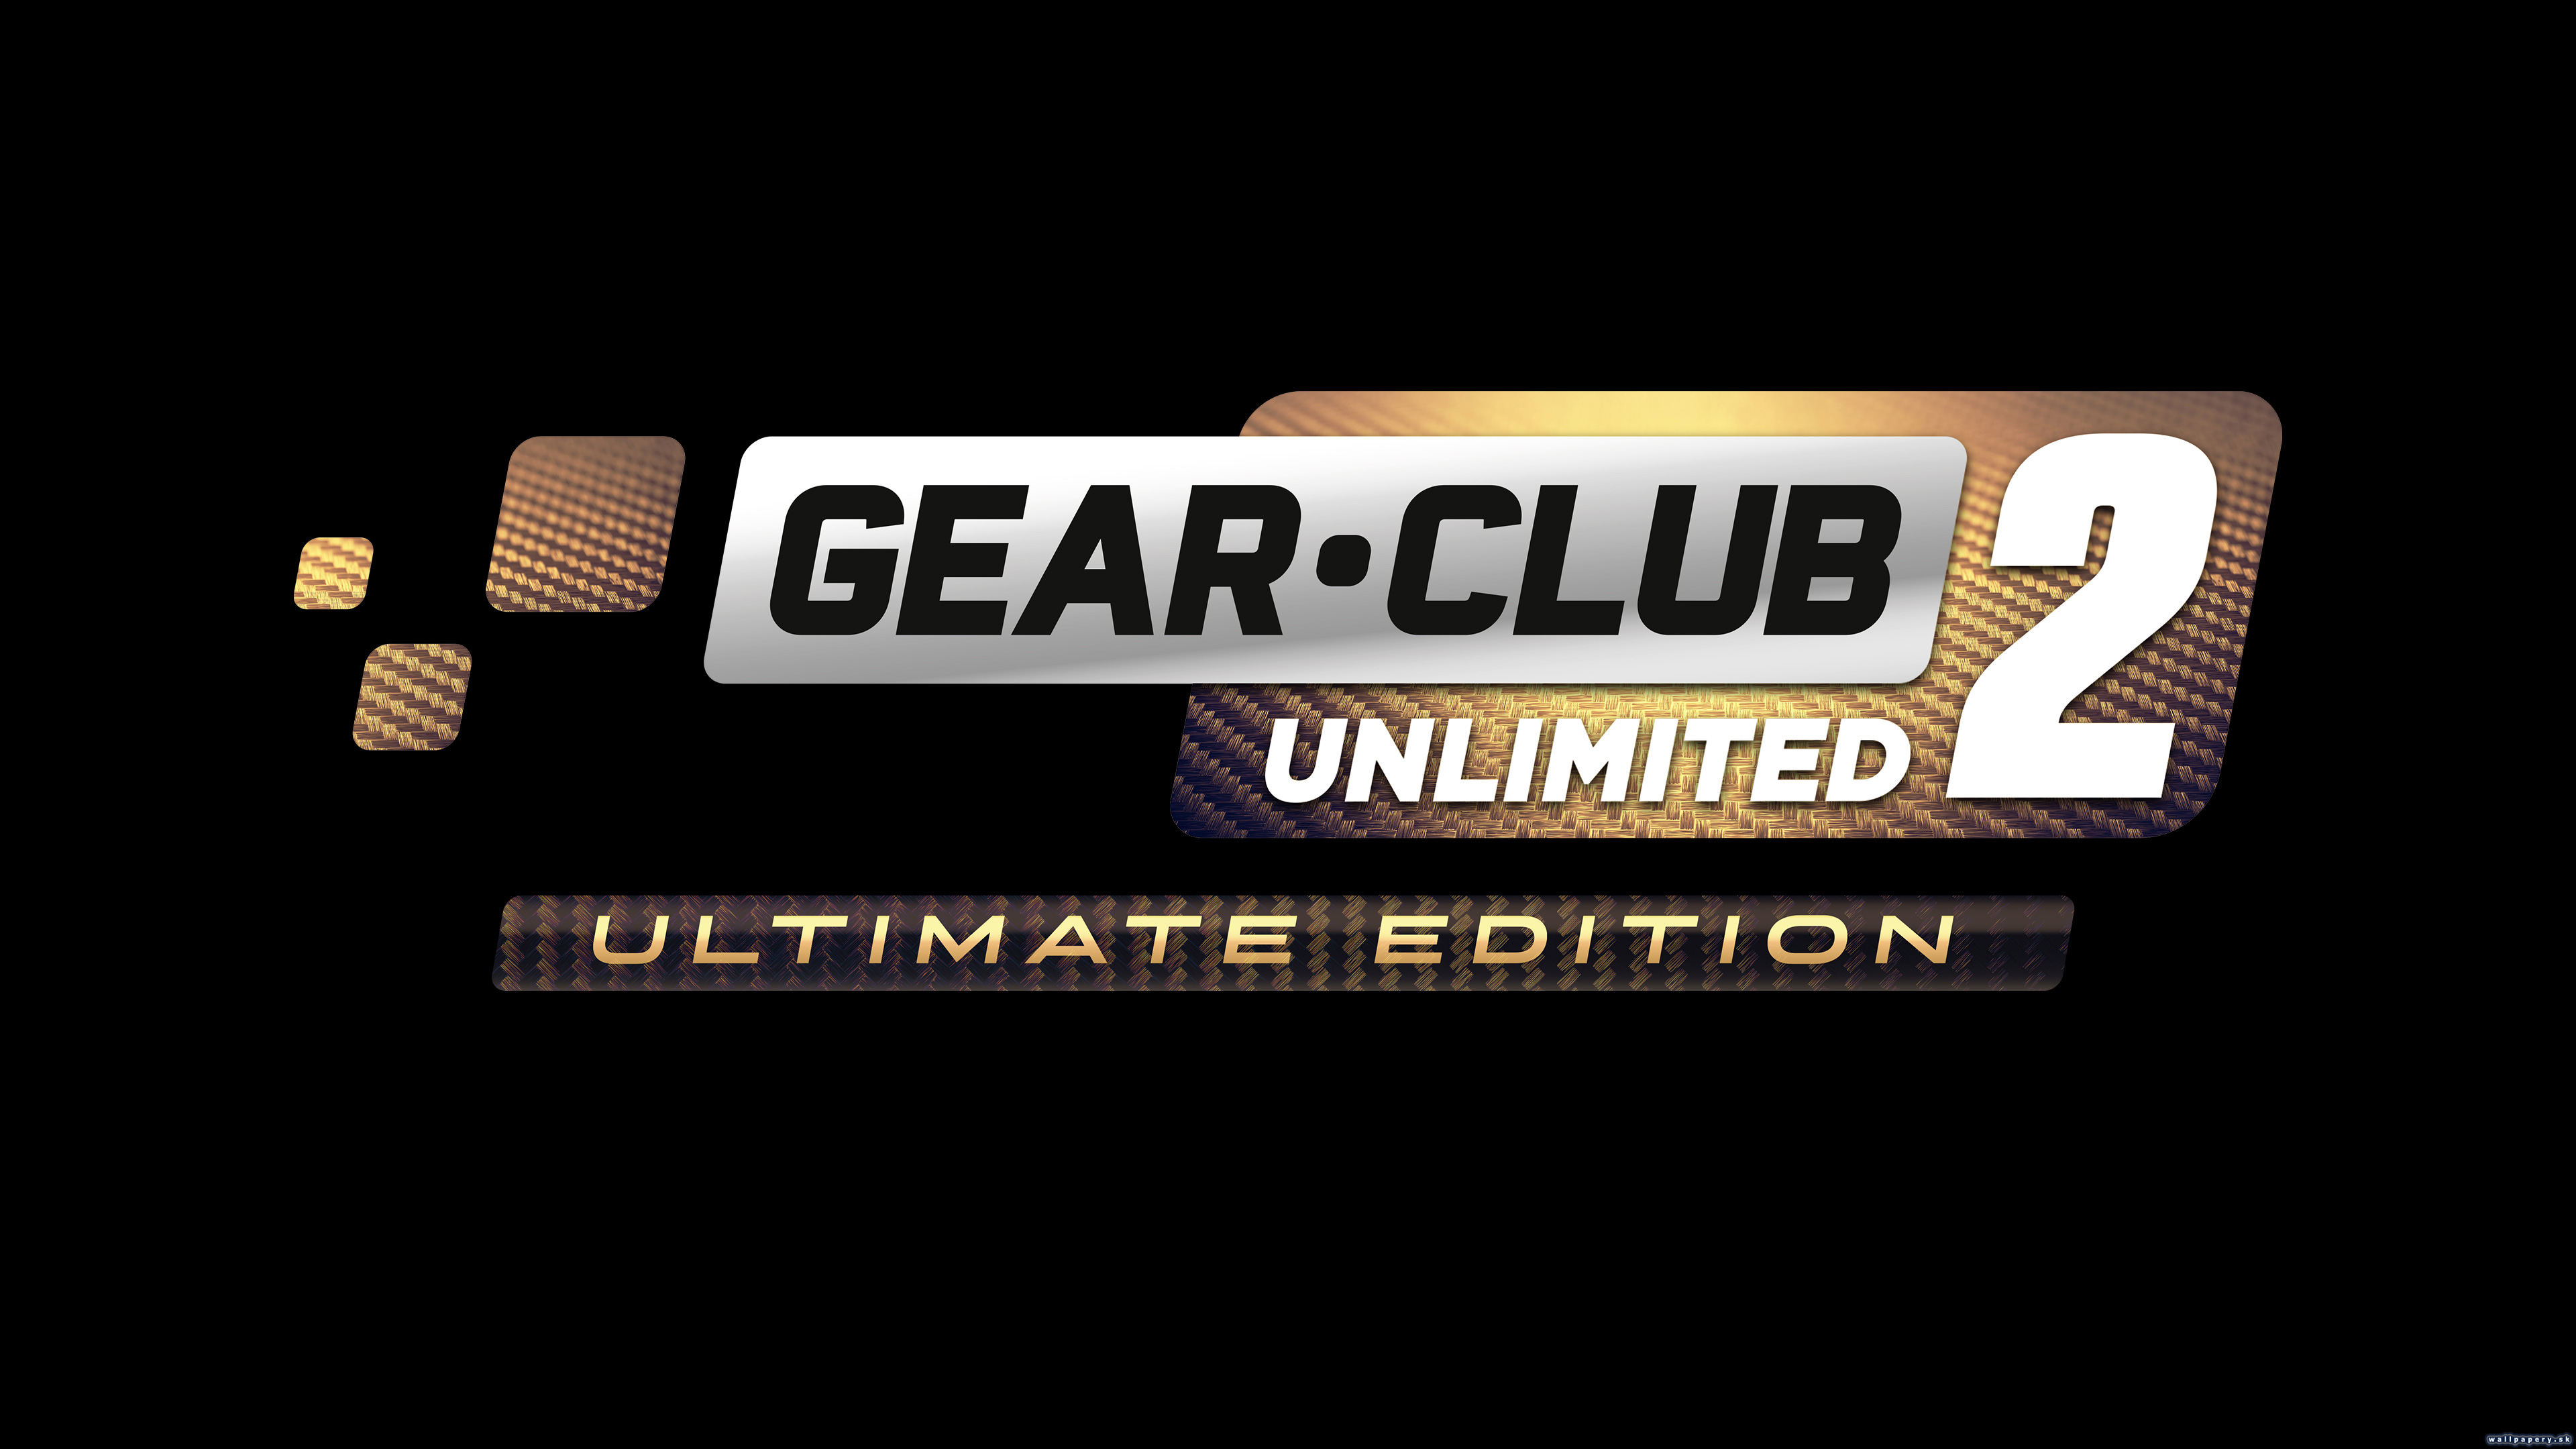 Gear.Club Unlimited 2 - Ultimate Edition - wallpaper 3